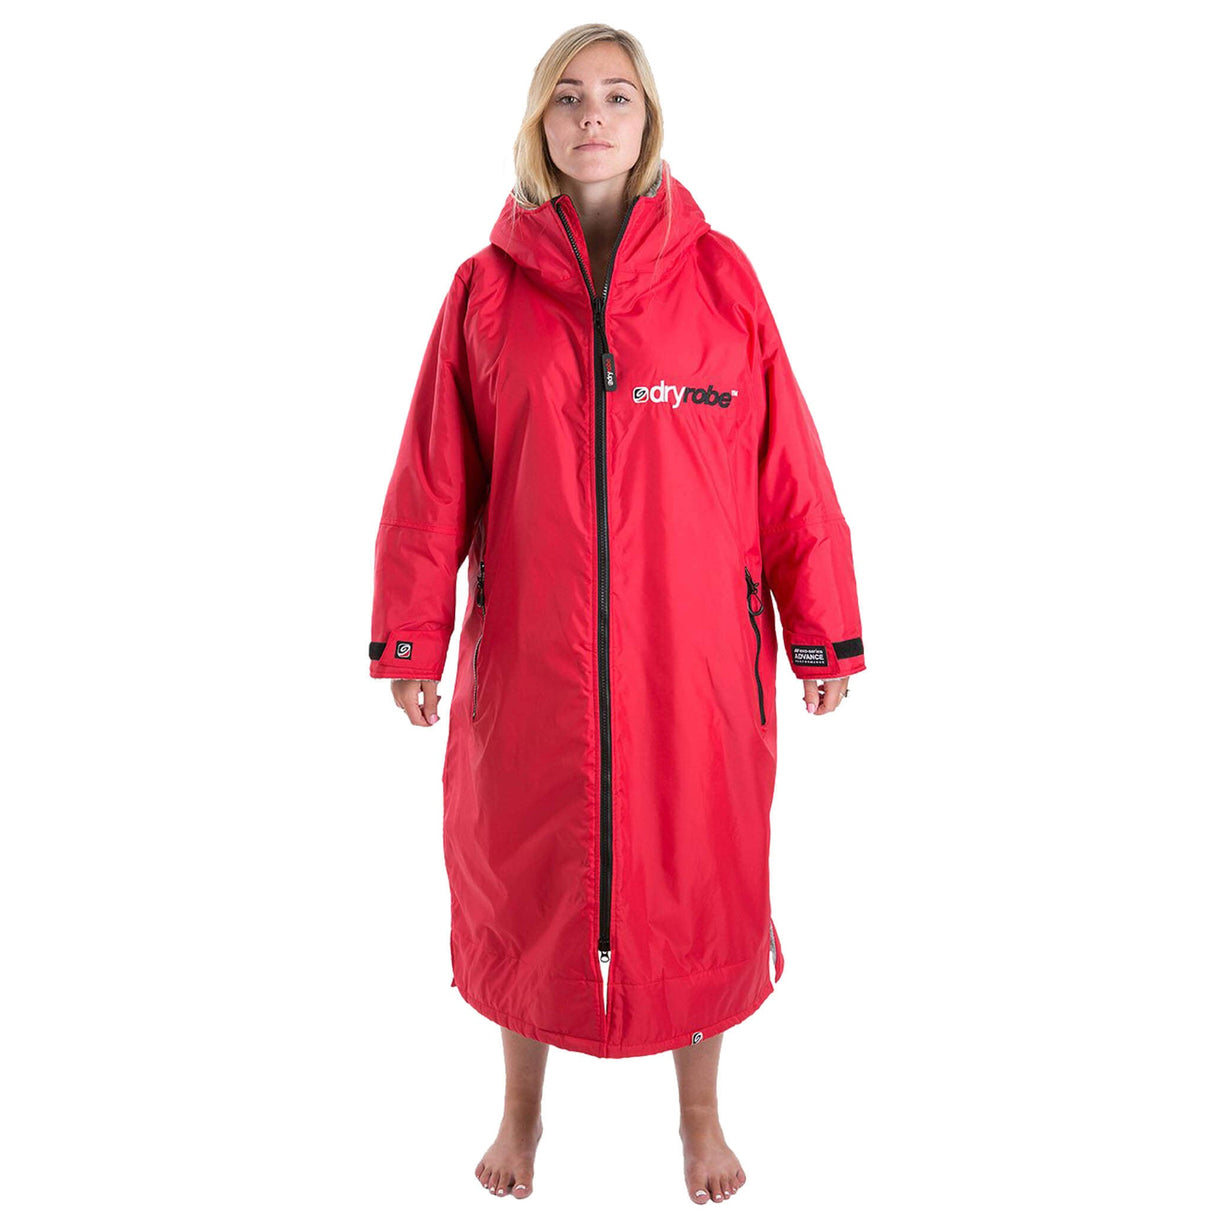 Dryrobe Red Long Sleeved Changing Robe